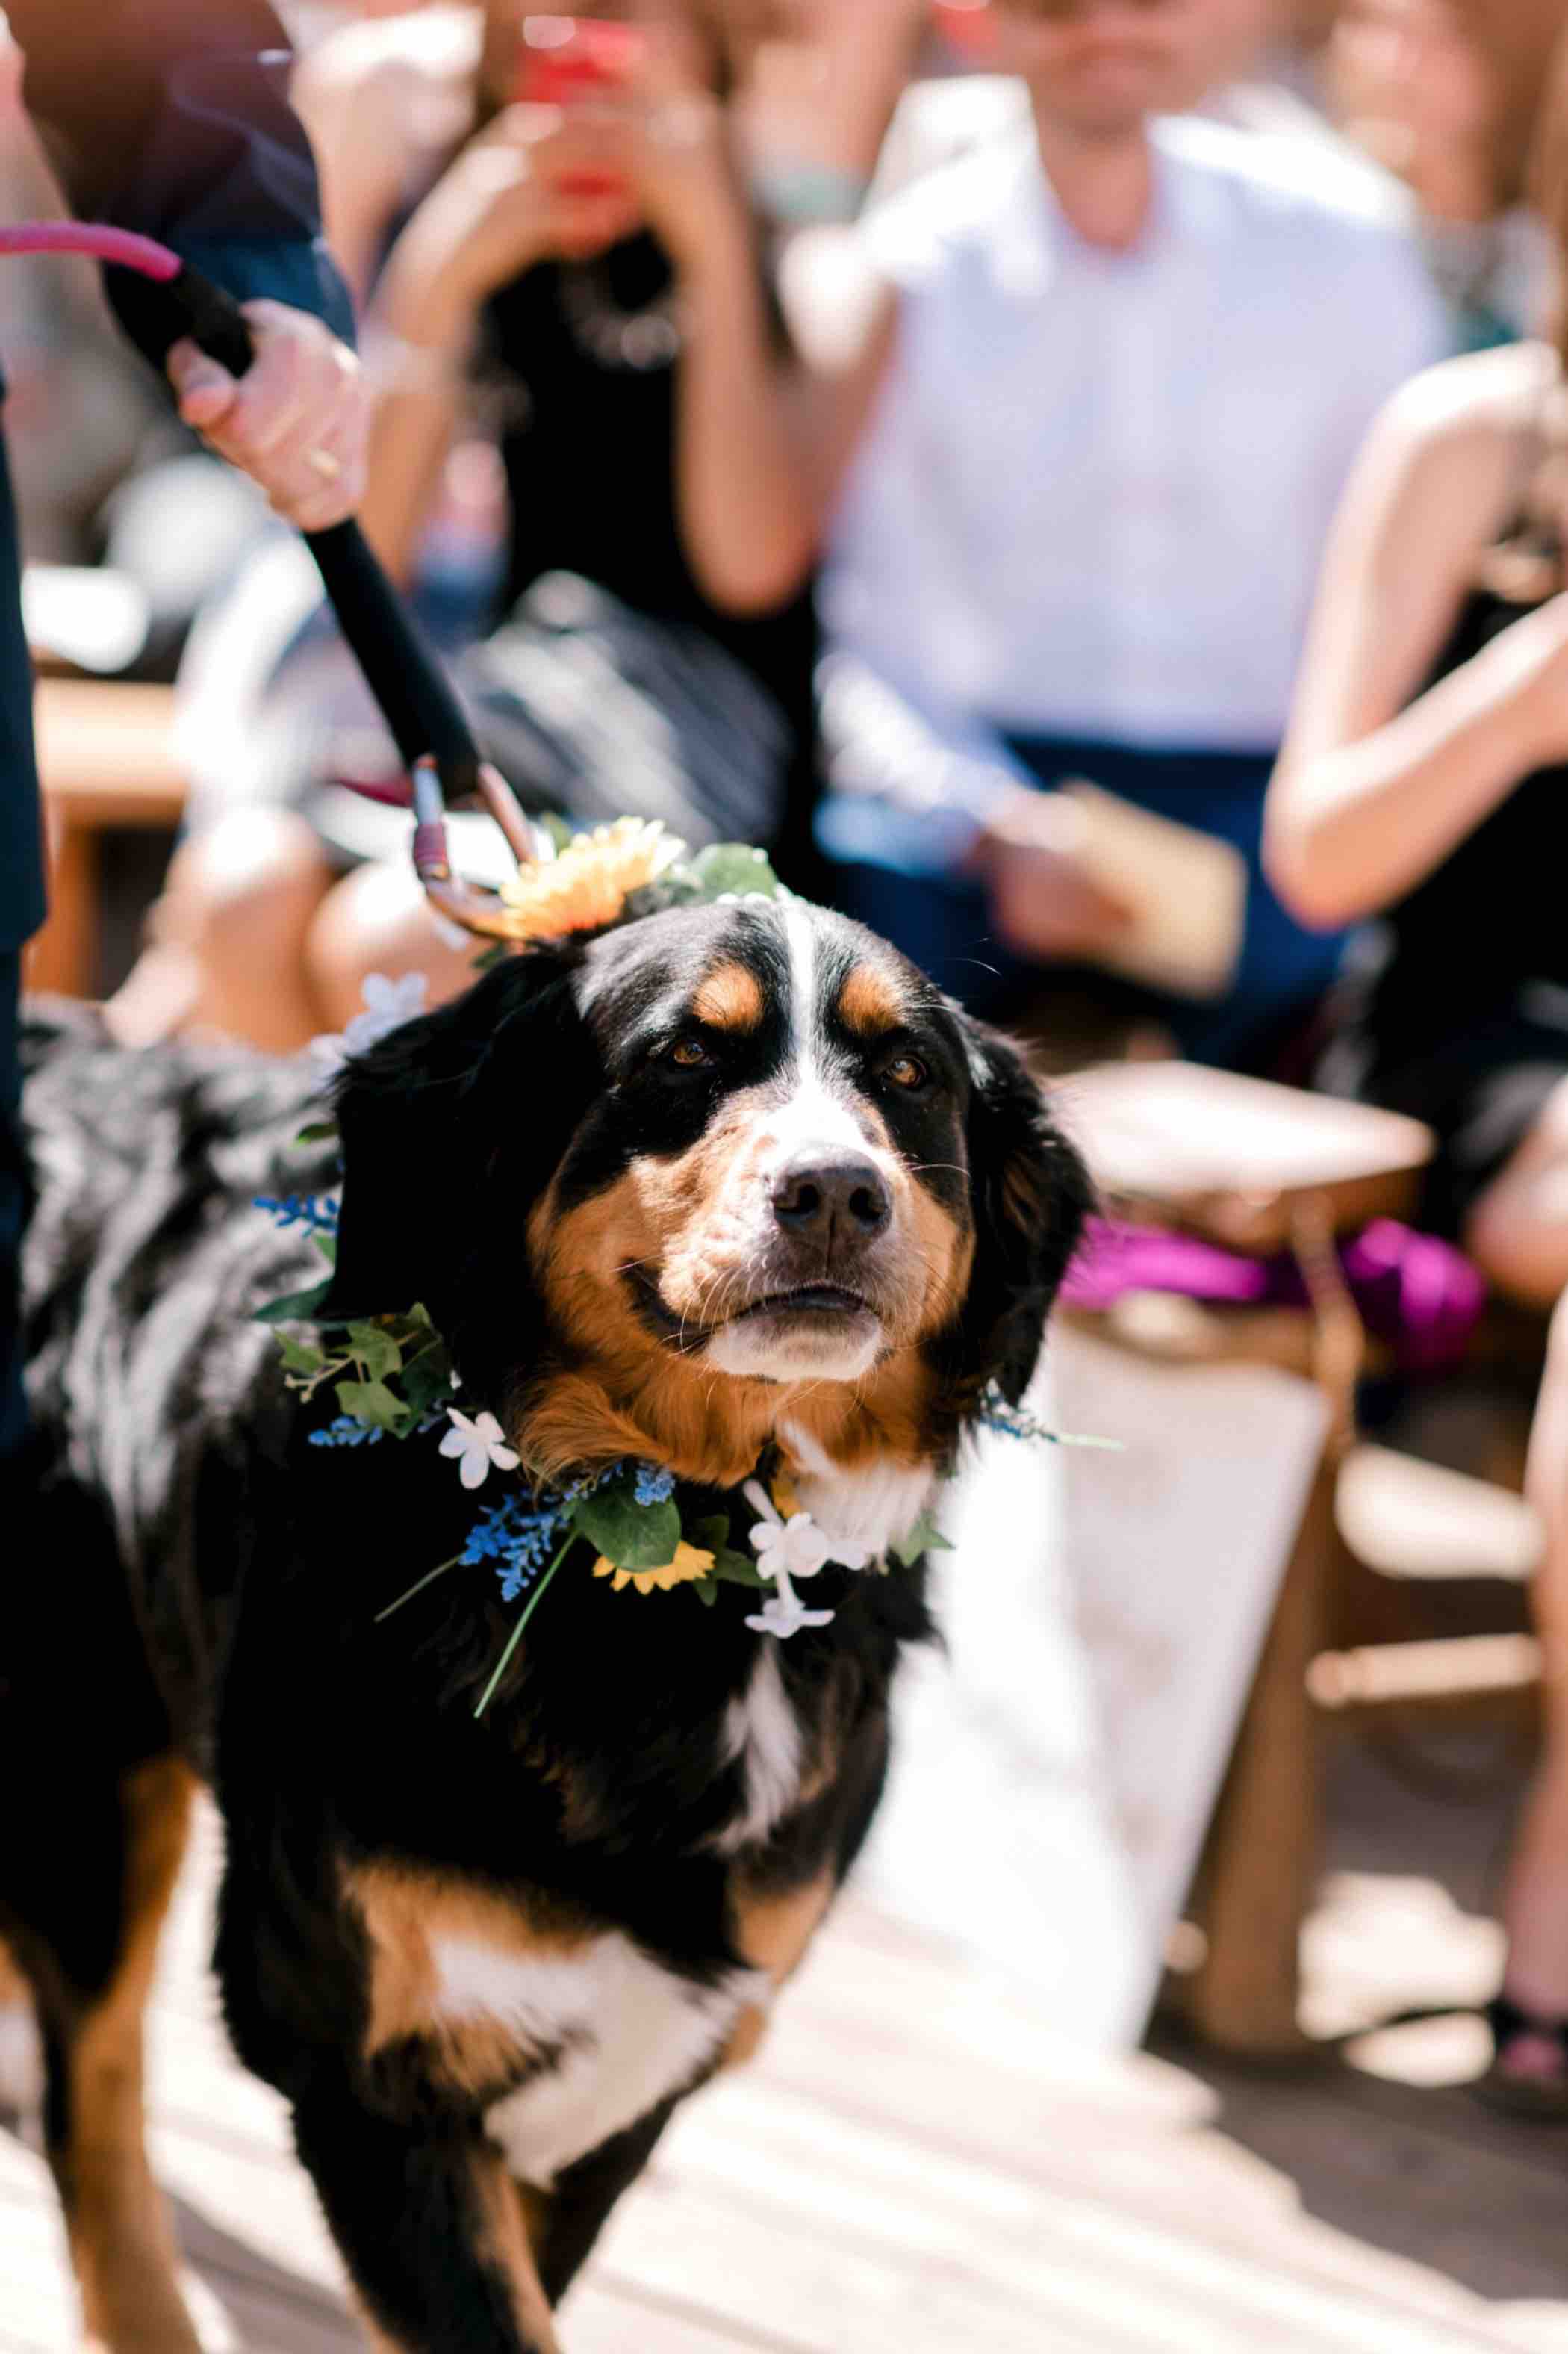 Luciem the bride and groom's beloved Bernese Mountain Dog, served as their ring bearer for their wedding at Piney River Ranch in Vail Colorado. Photo by Ali and Garrett, Romantic, Adventurous, Nostalgic Wedding Photographers.